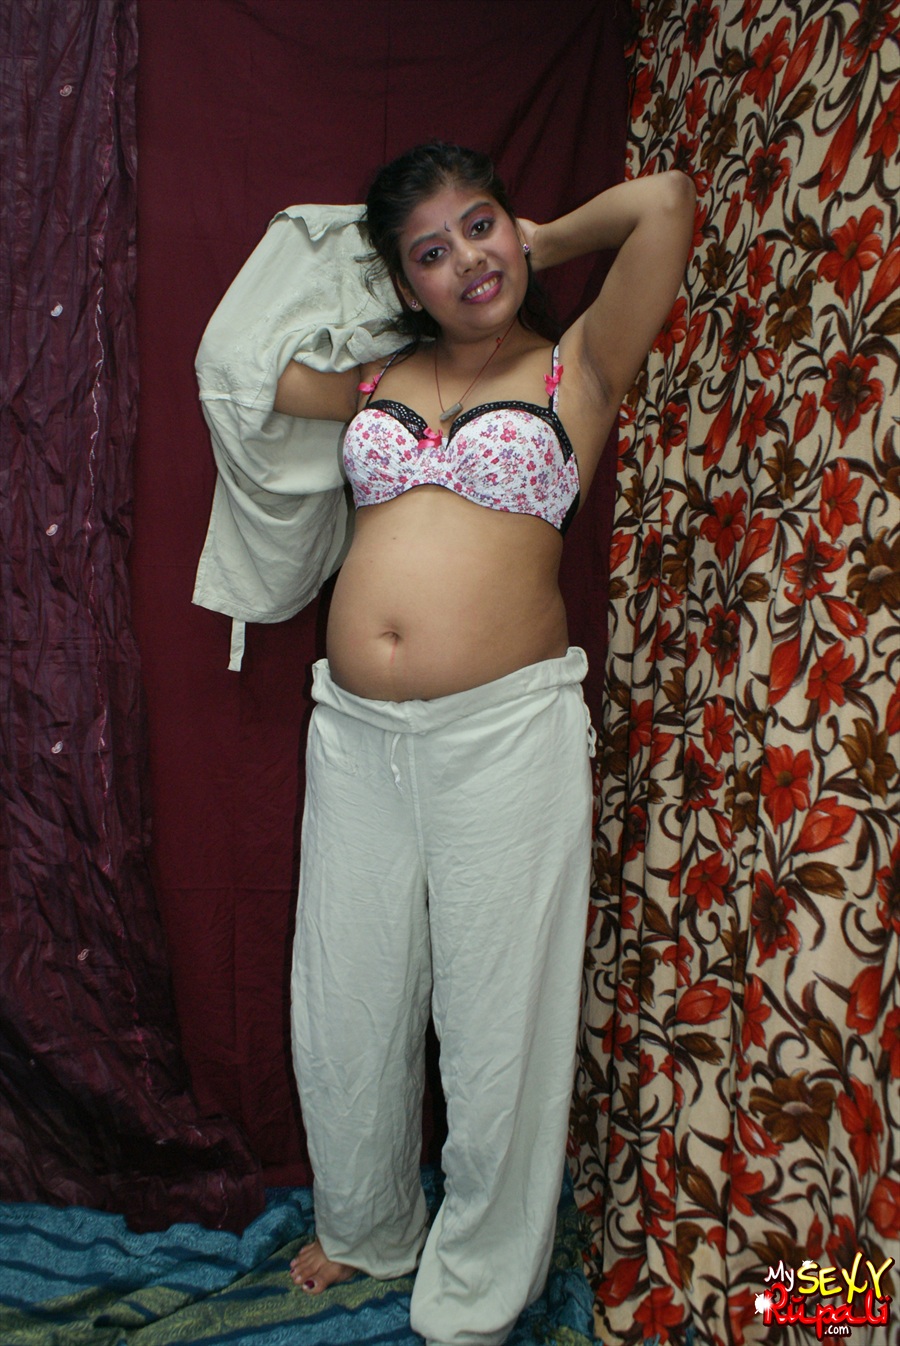 Iab picture gallery 27 Rupali bhabhi in her night suit